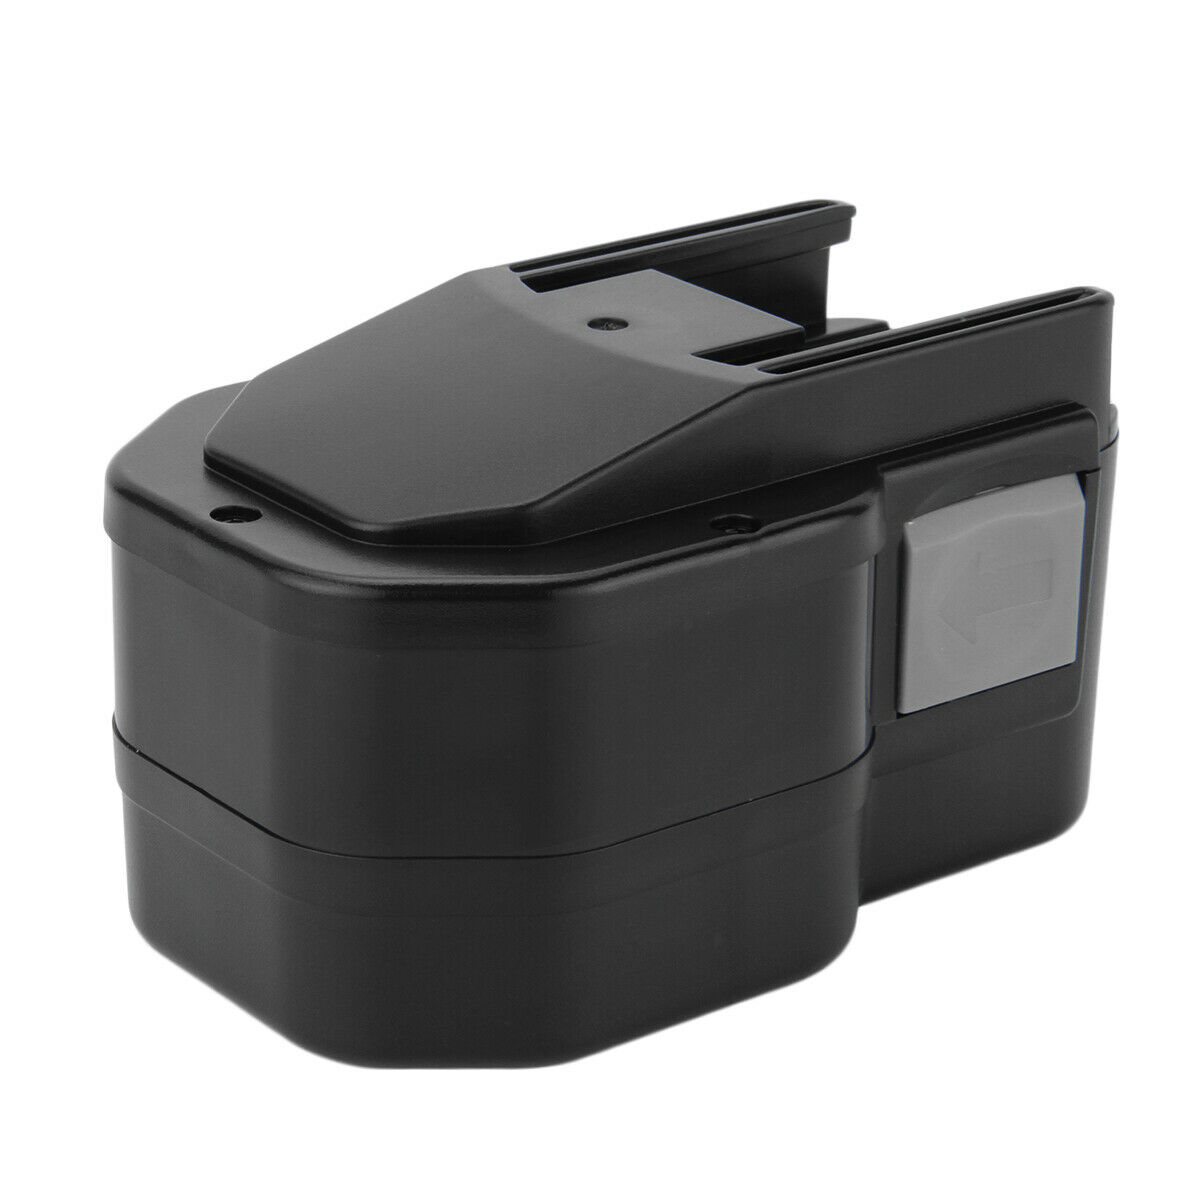 MILWAUKEE 0511-21 0512-21 0512-25 0513-21 0513-20 0514-20 14,4V compatible Battery